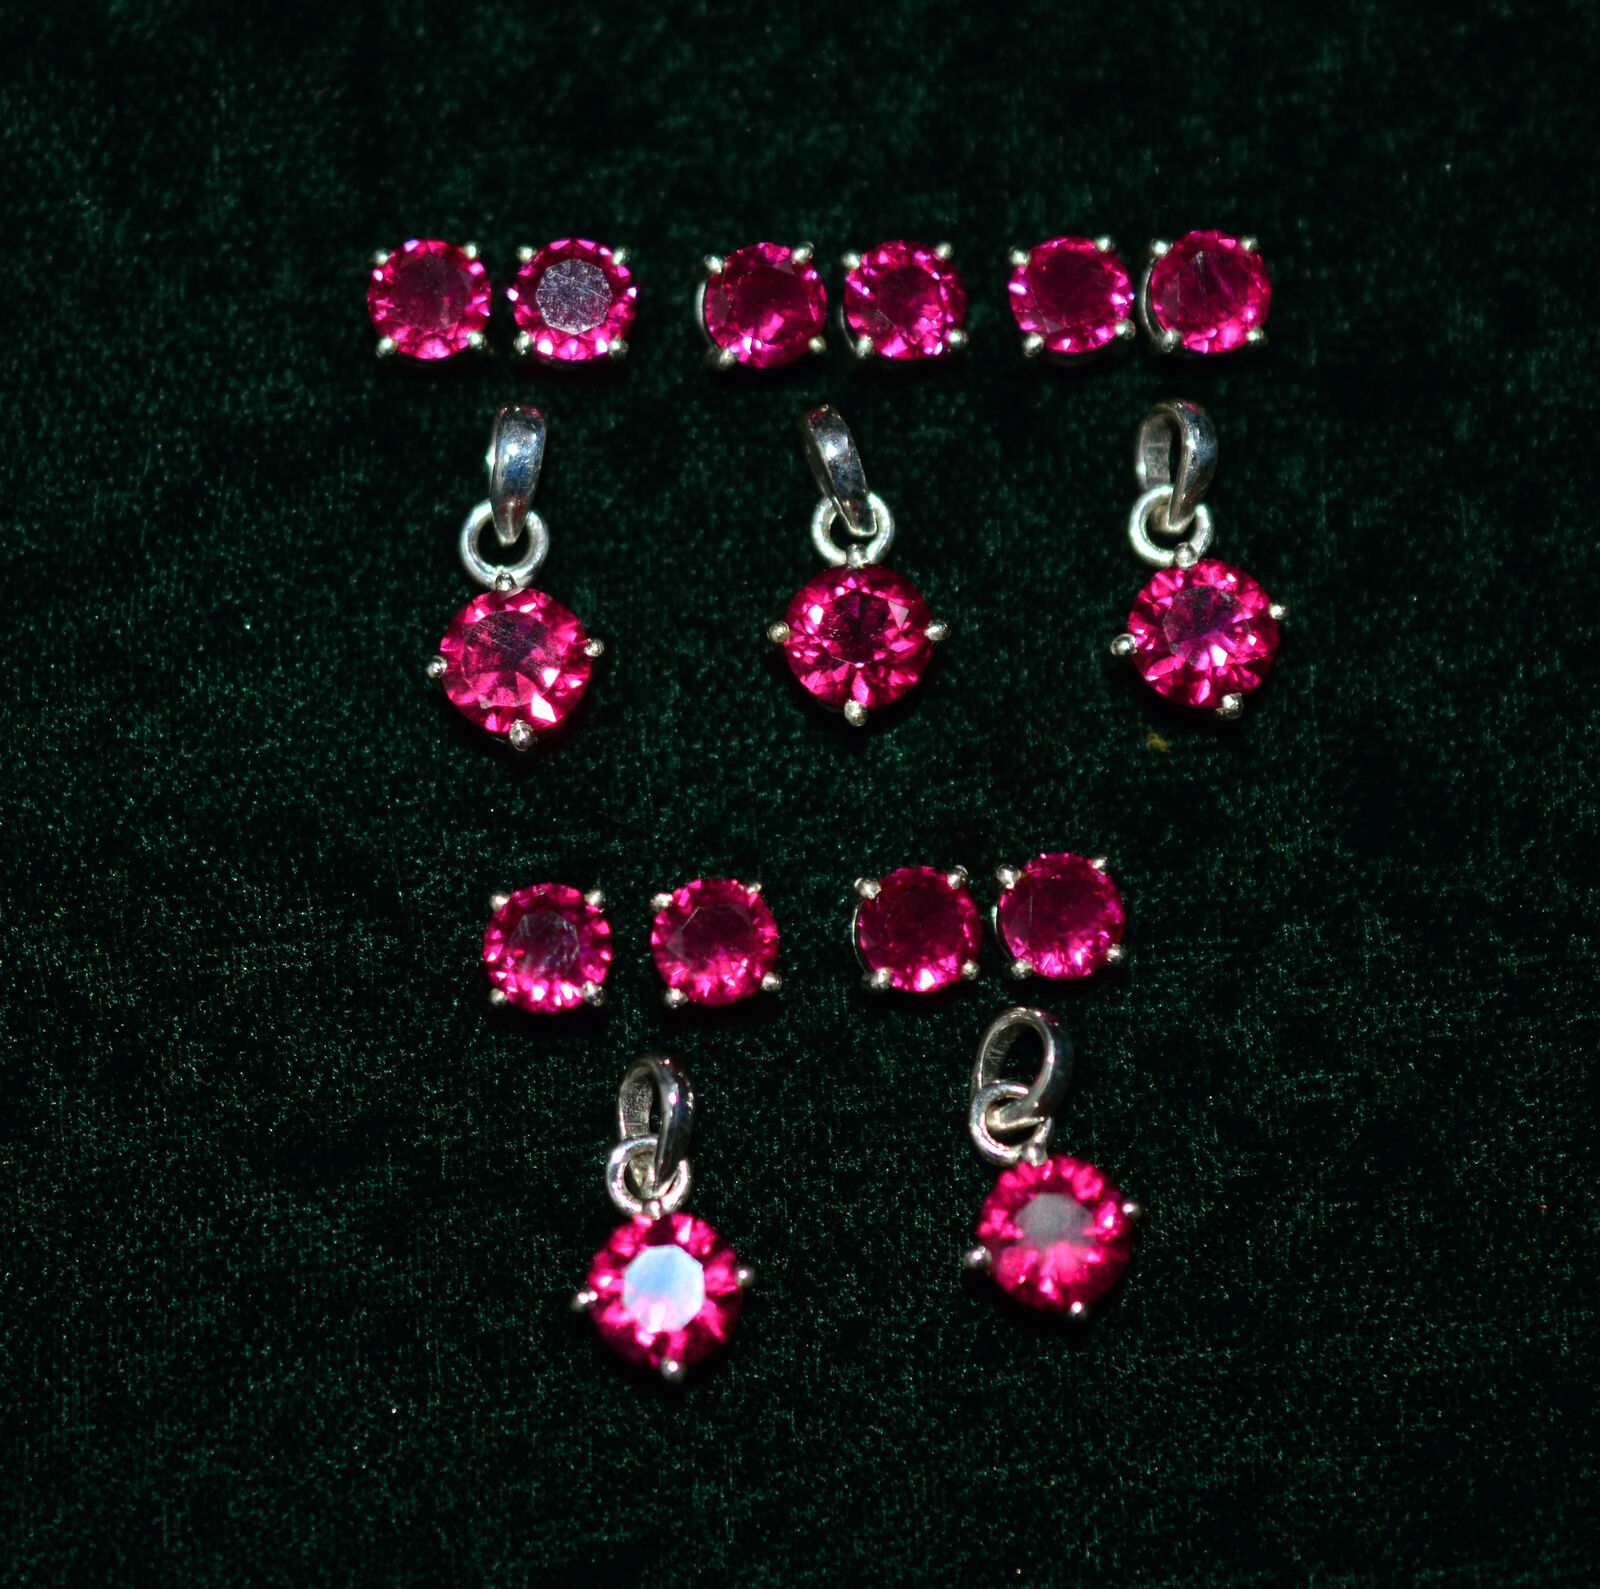 Wholesale 9pc 925 Sterling Silver Cut Red Ruby Topaz Earring Pendant Set  0 O609